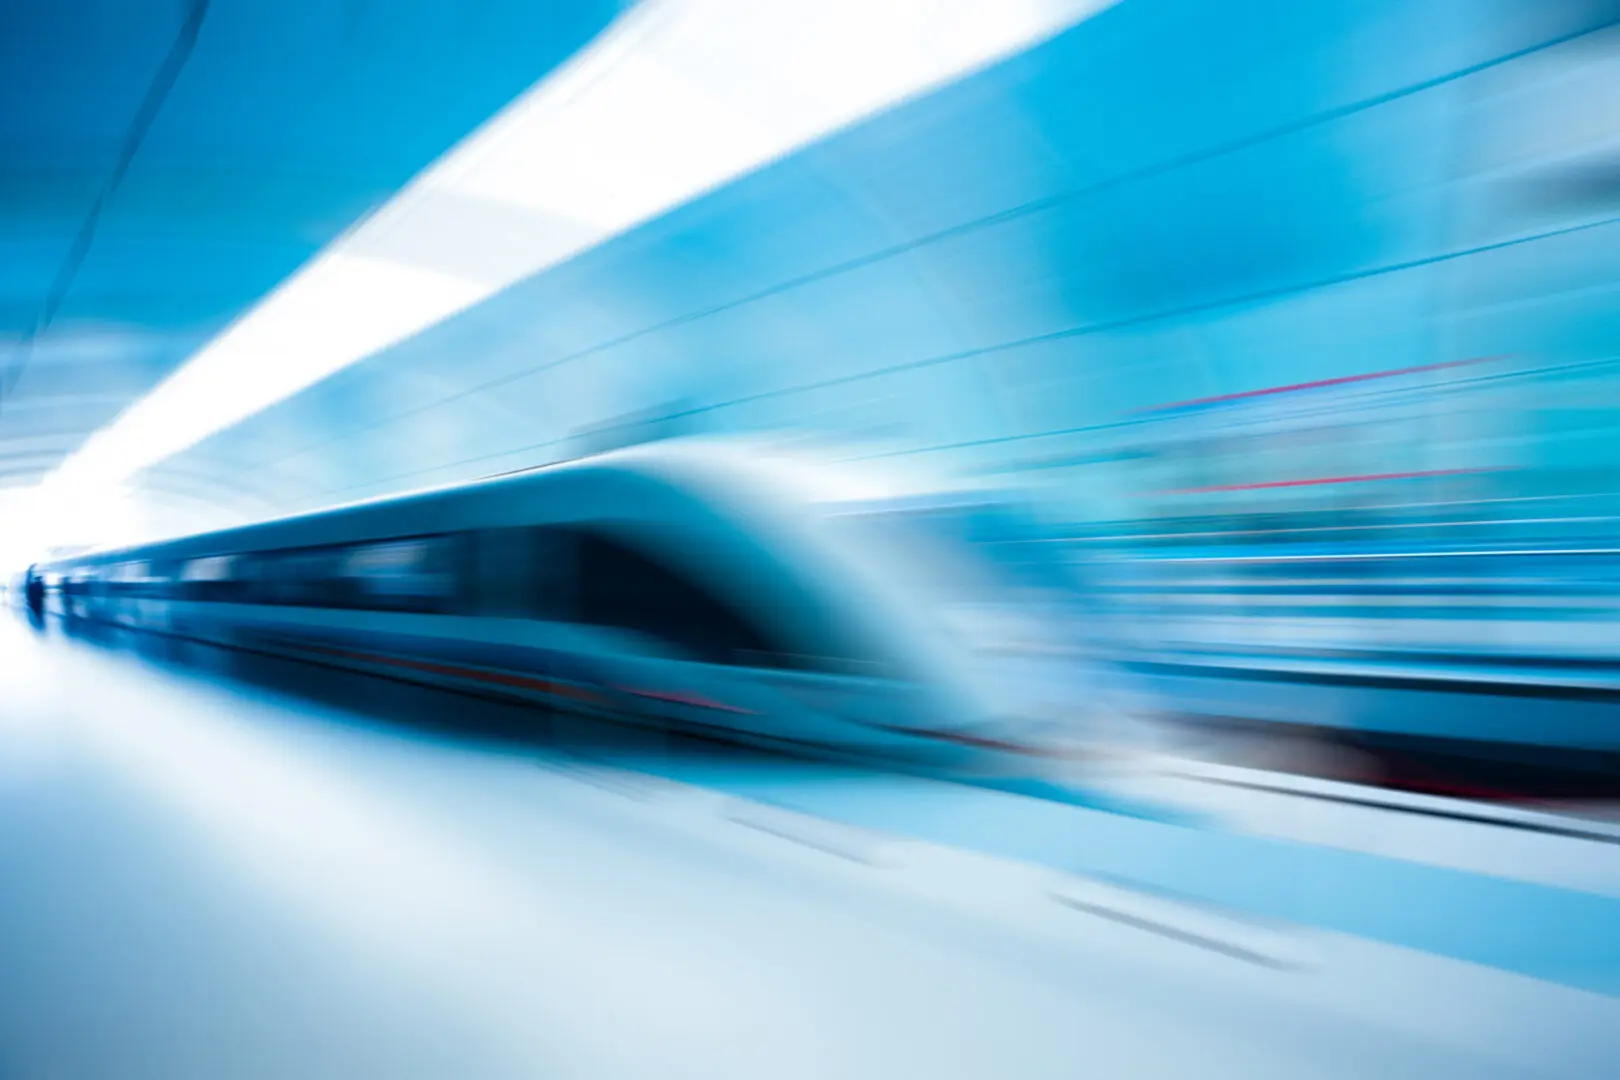 blurred image of a bullet train at speed